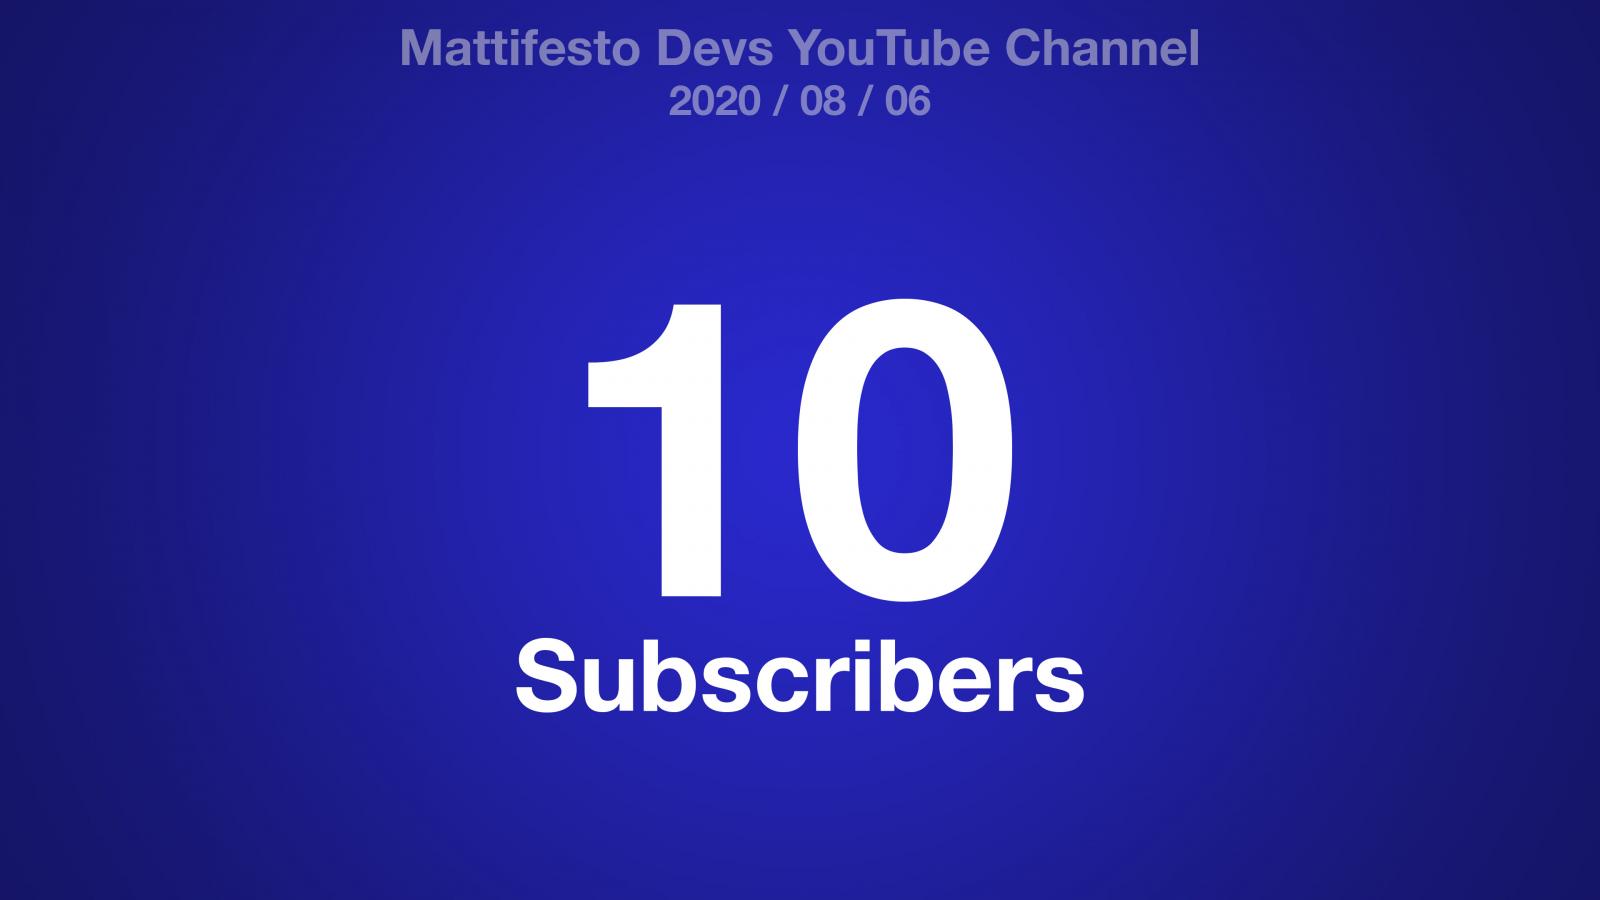 A blue radial gradient background with the text: Mattifesto Devs YouTube Channel 2020/08/06 10 Subscribers